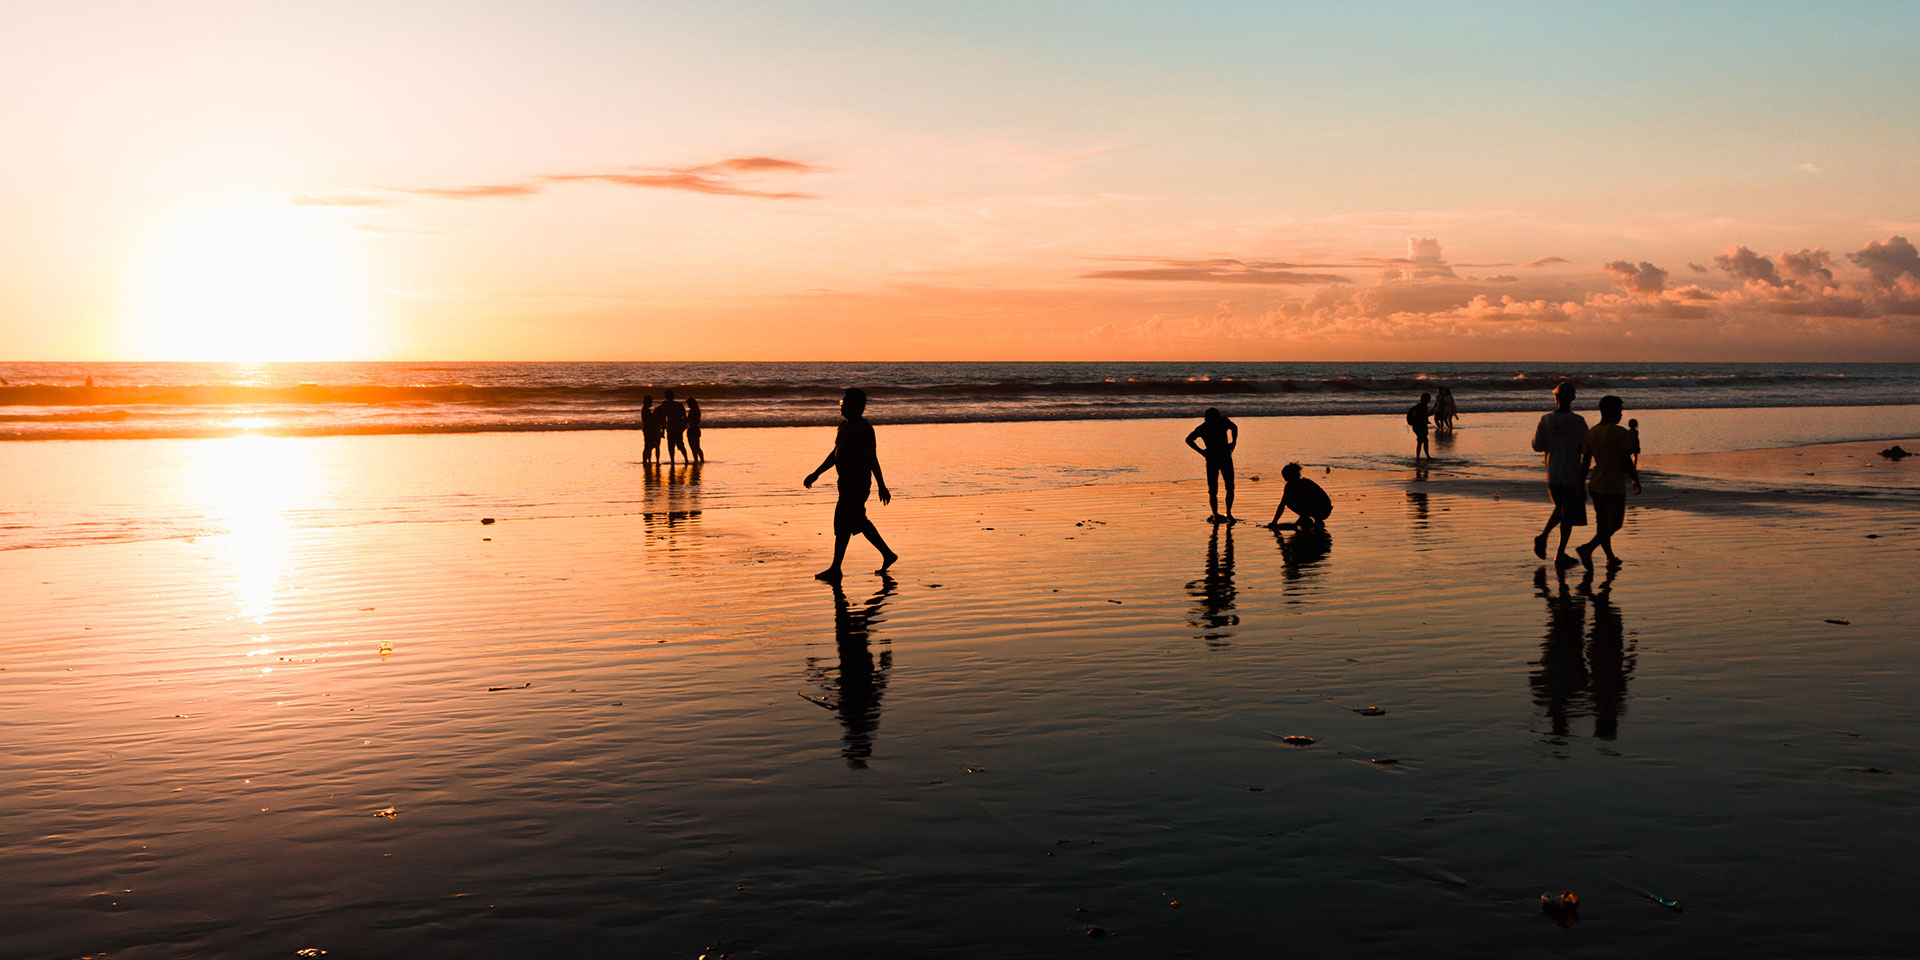 People on a beach at sunset